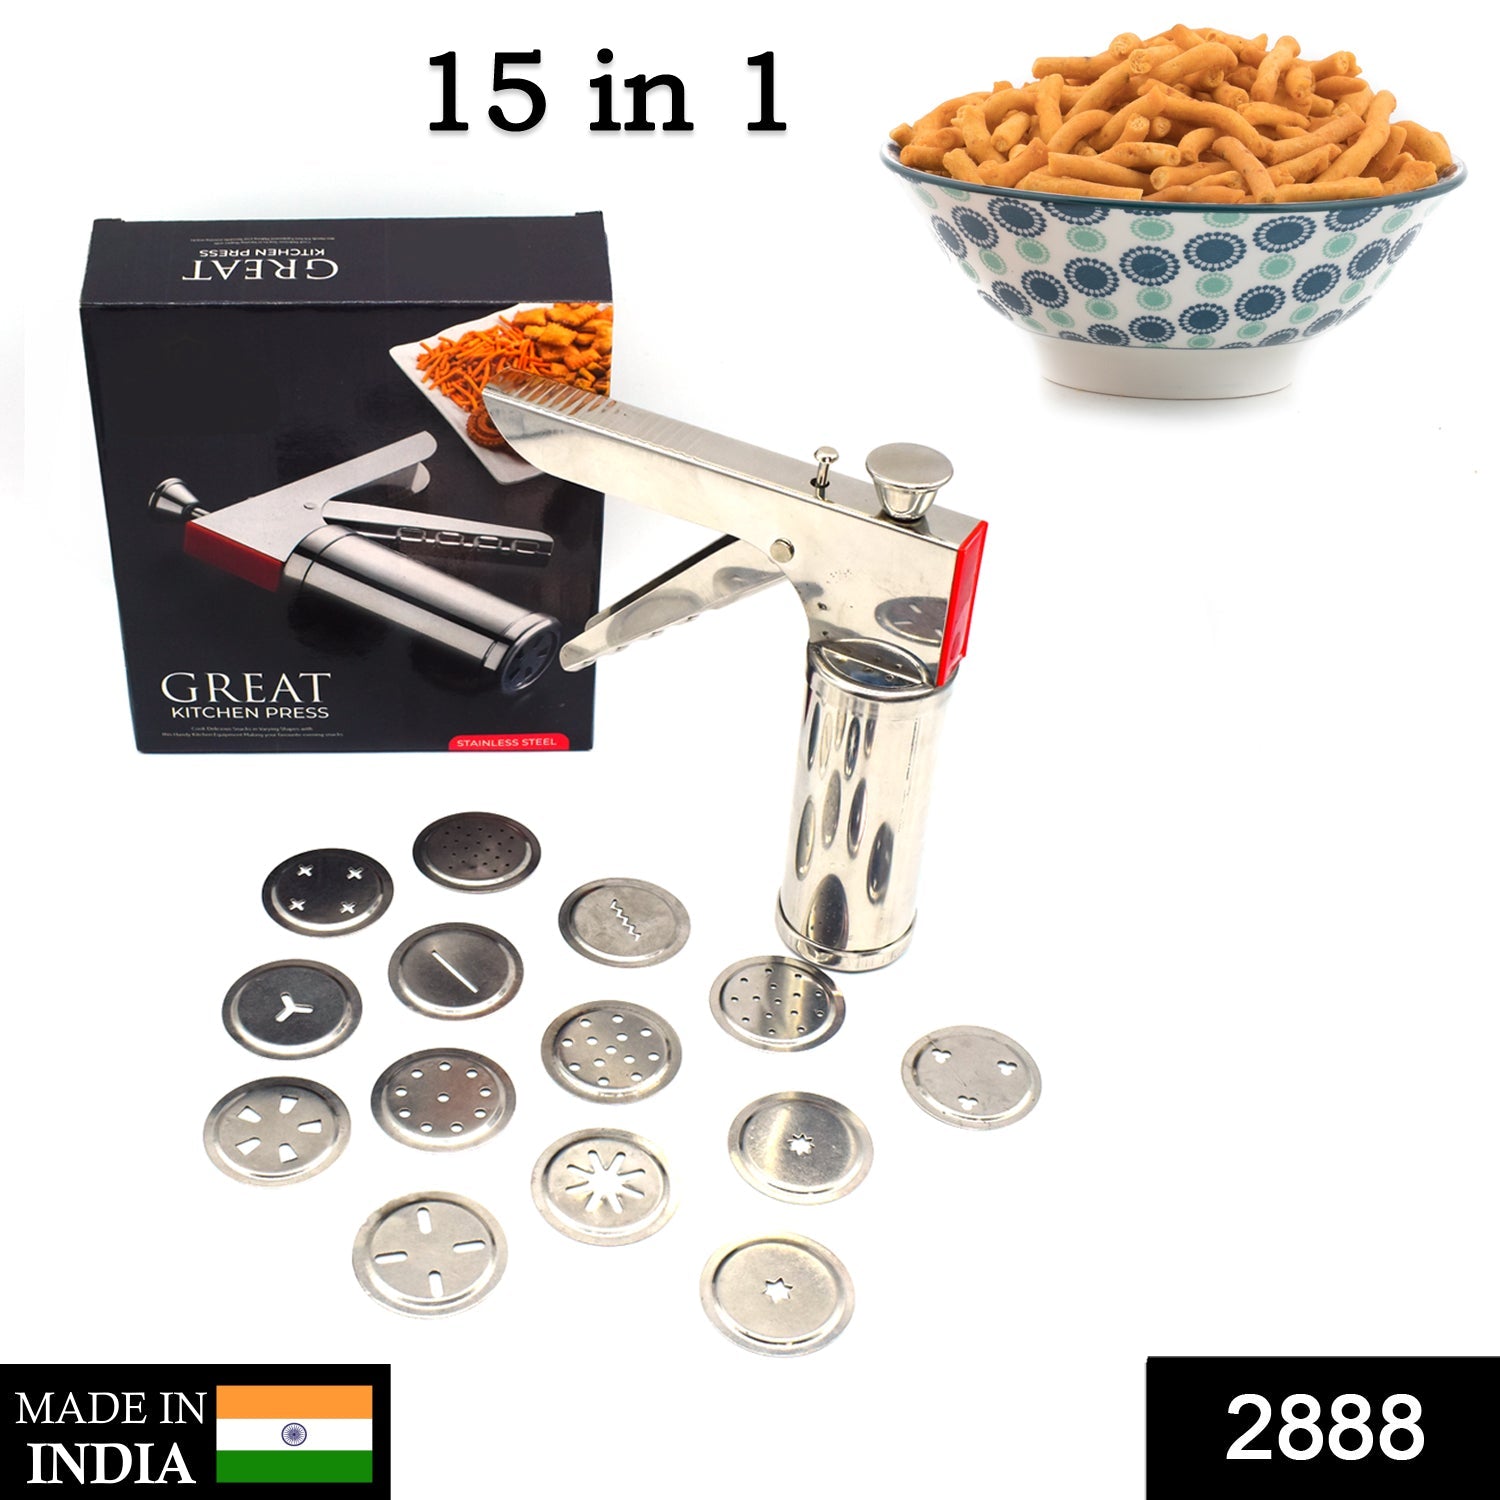 2888 Kitchen Press Sev Maker Machine Chakli Maker Noodles Cookies Namkeen Maker with 15 Different Types of Stainless Steel plates, Silver DeoDap